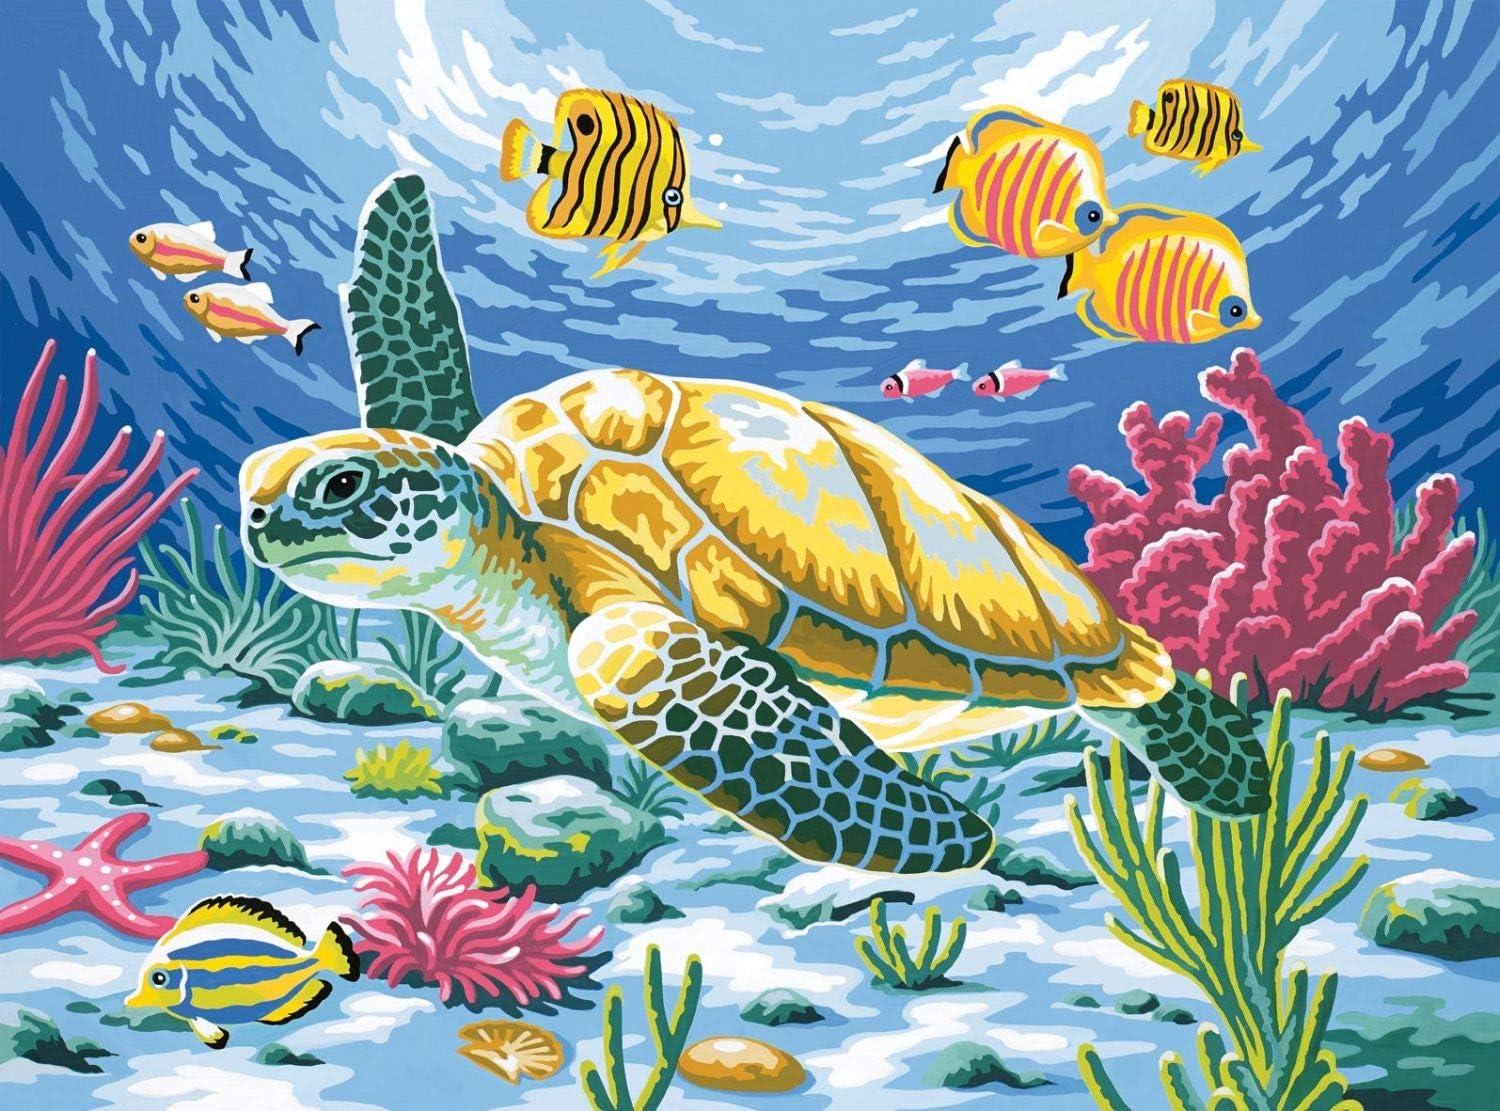 Reeves Paint by Numbers Large 12x16 inch - Sea Turtle